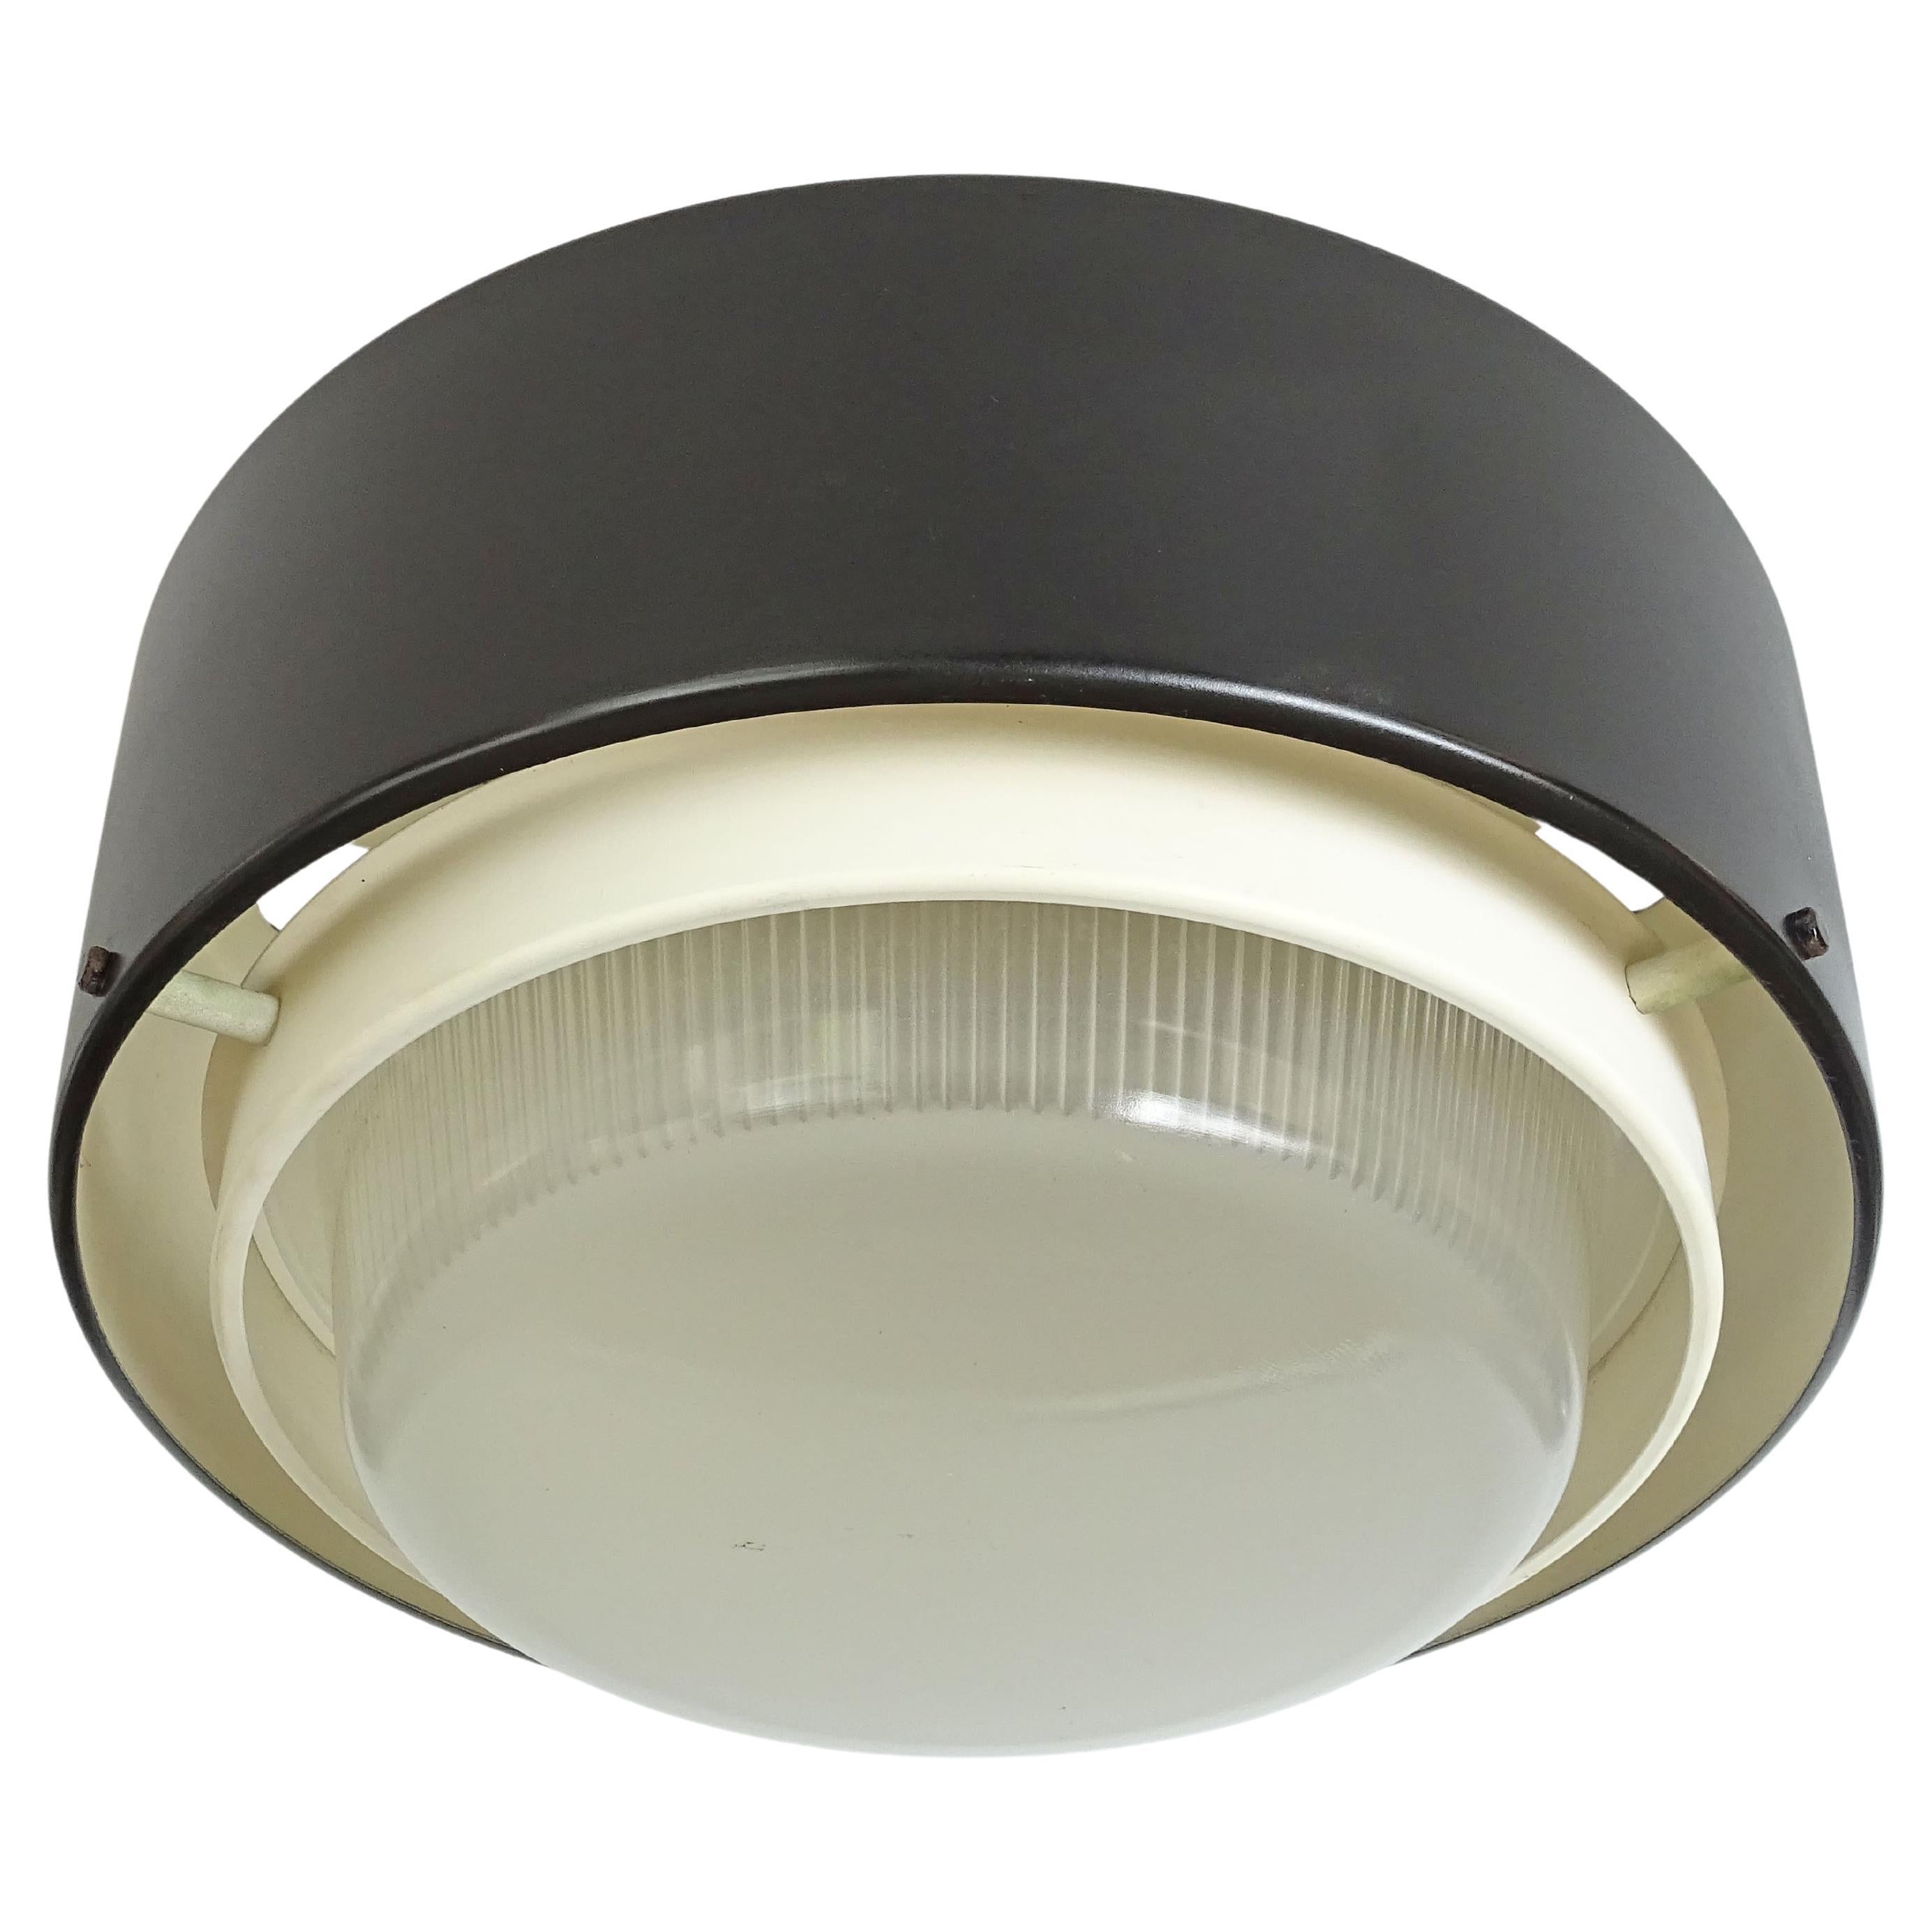 Stilnovo 1950 ceiling lamp in black and white lacquered metal